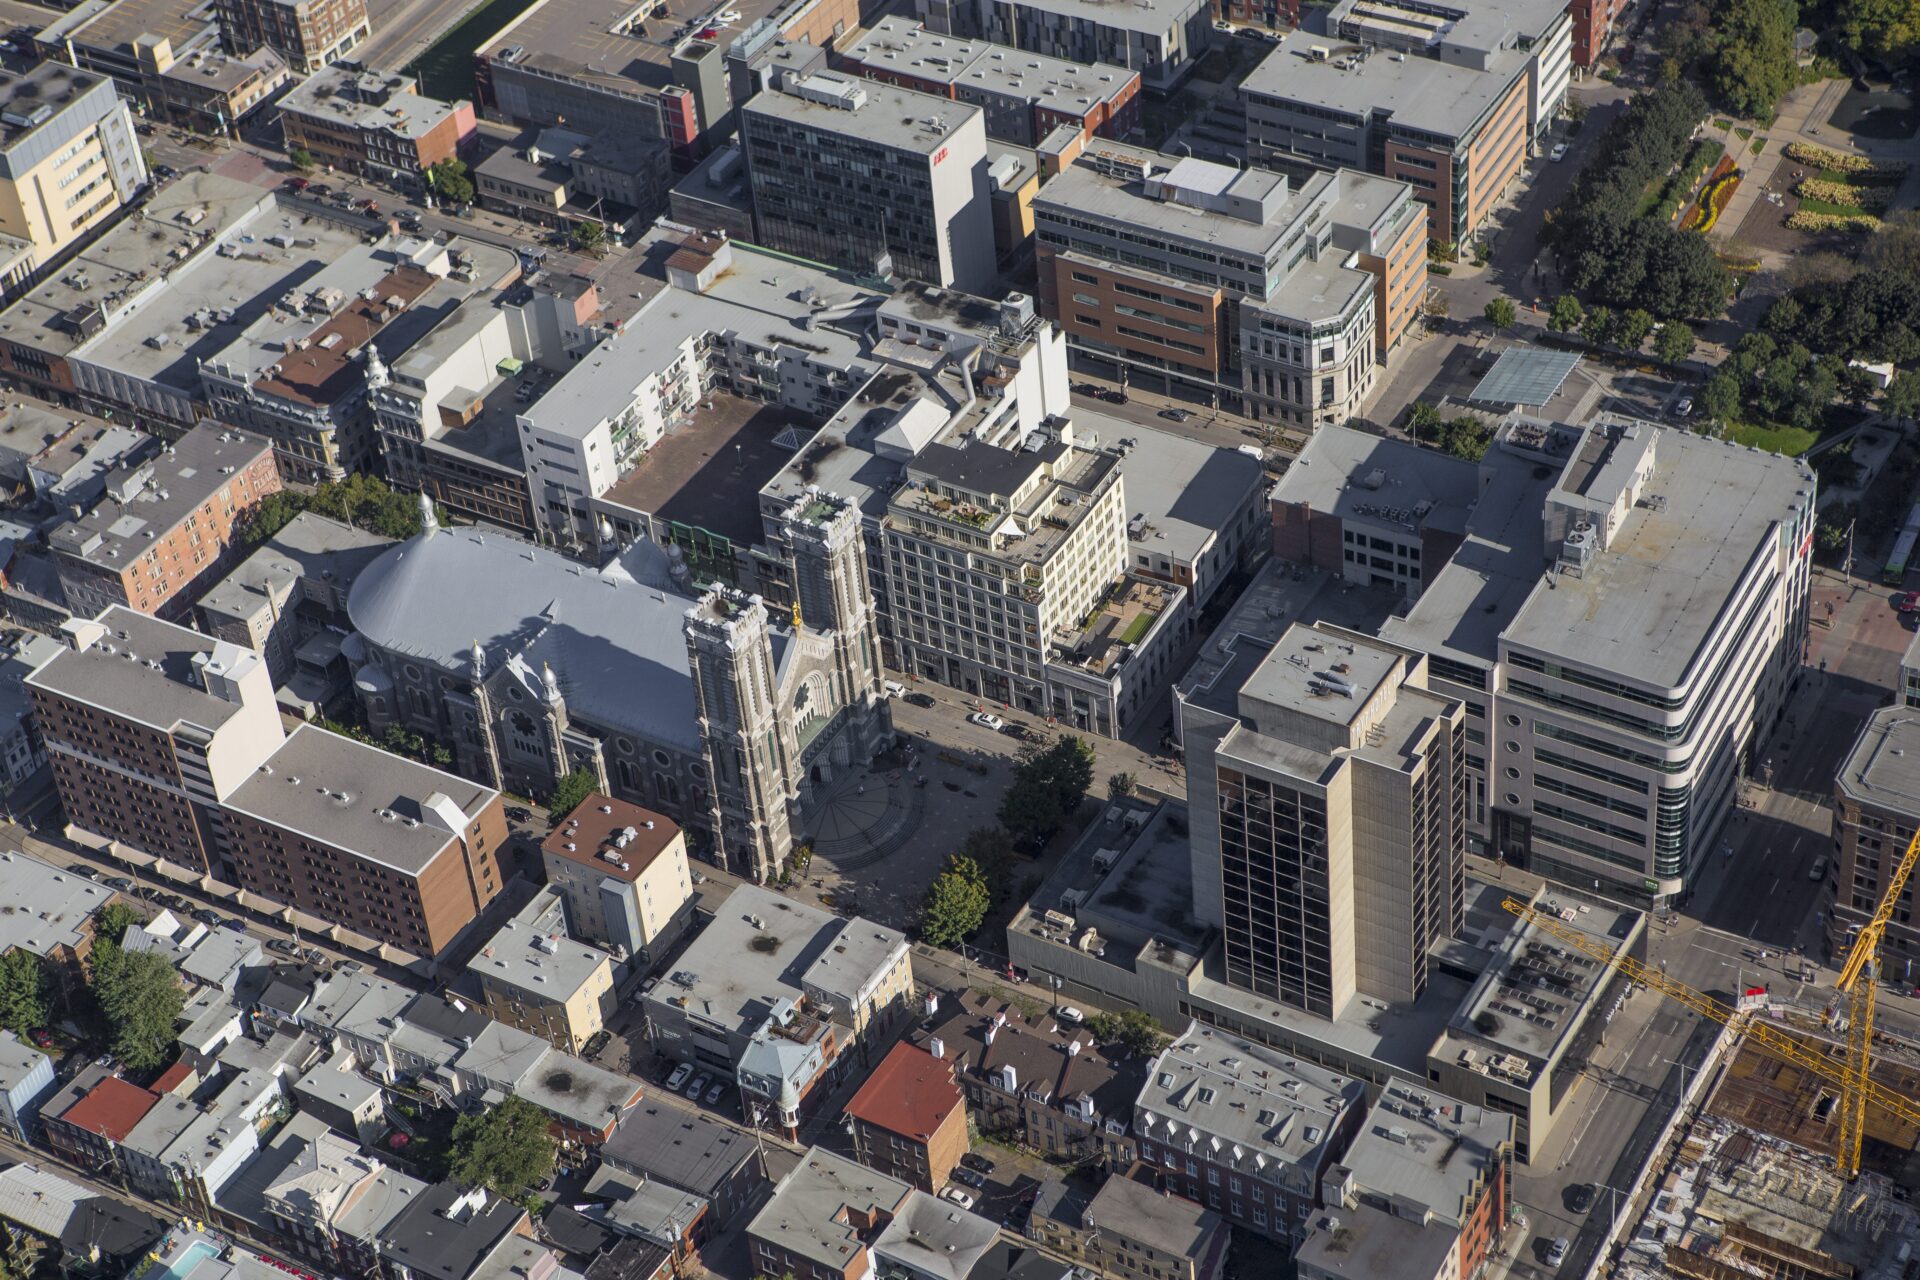 A grid of about seven city blocks shows a mix of flat-topped homes, commercial buildings and a grand church in the middle. 